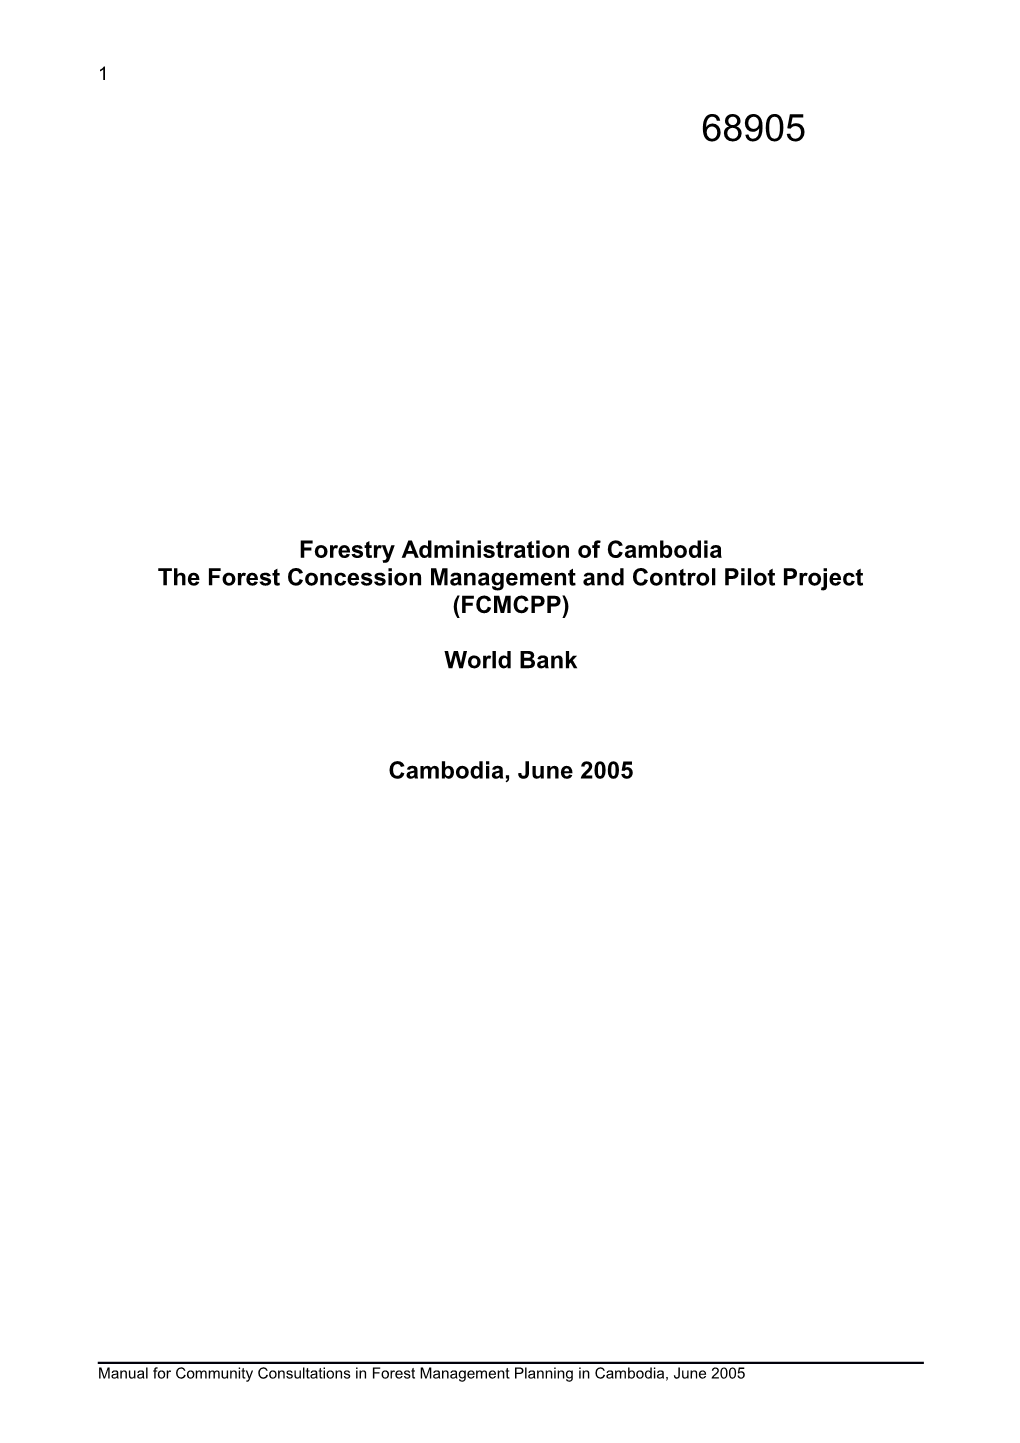 The Forest Concession Management and Control Pilot Project (FCMCPP)